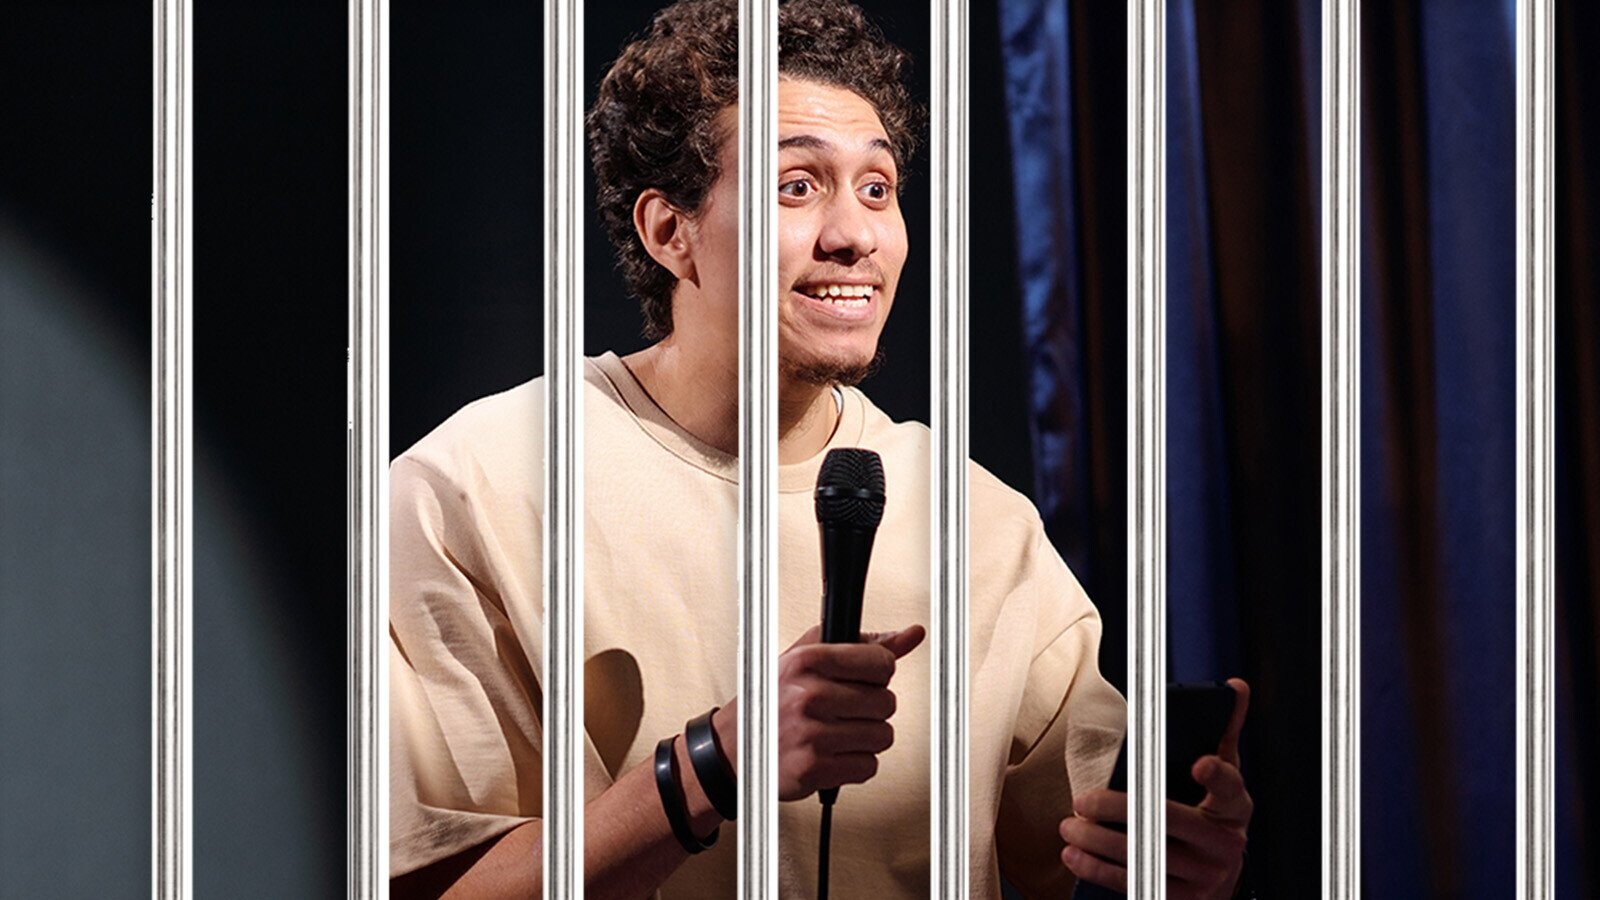 5 Jokes That Landed Comedians in Actual Jail